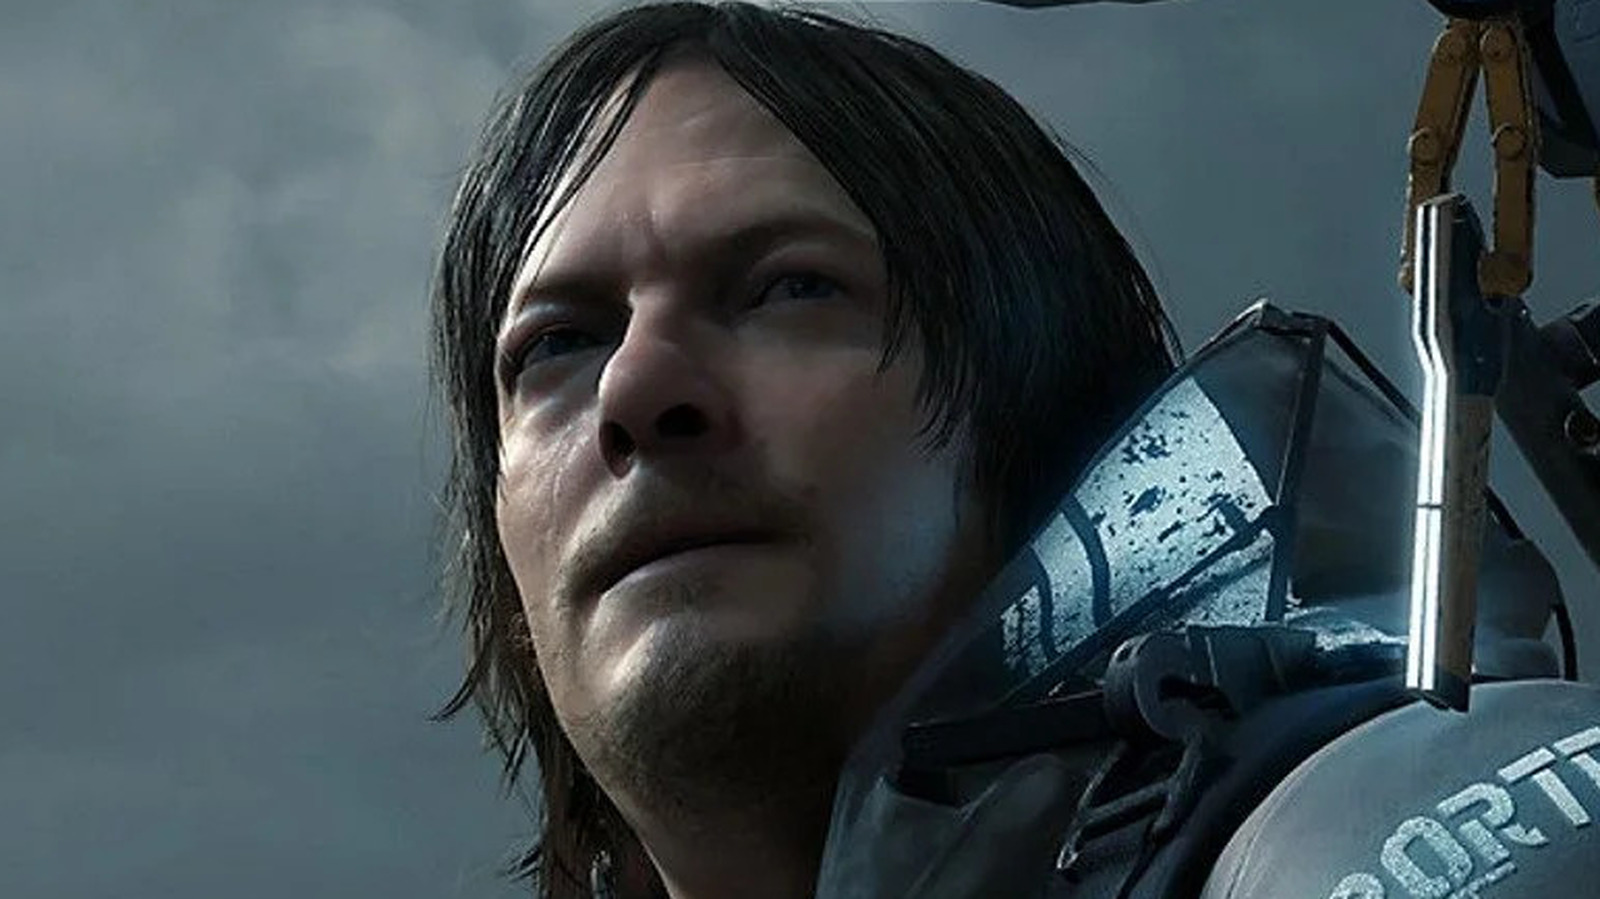 Death Stranding 2 has been all but confirmed